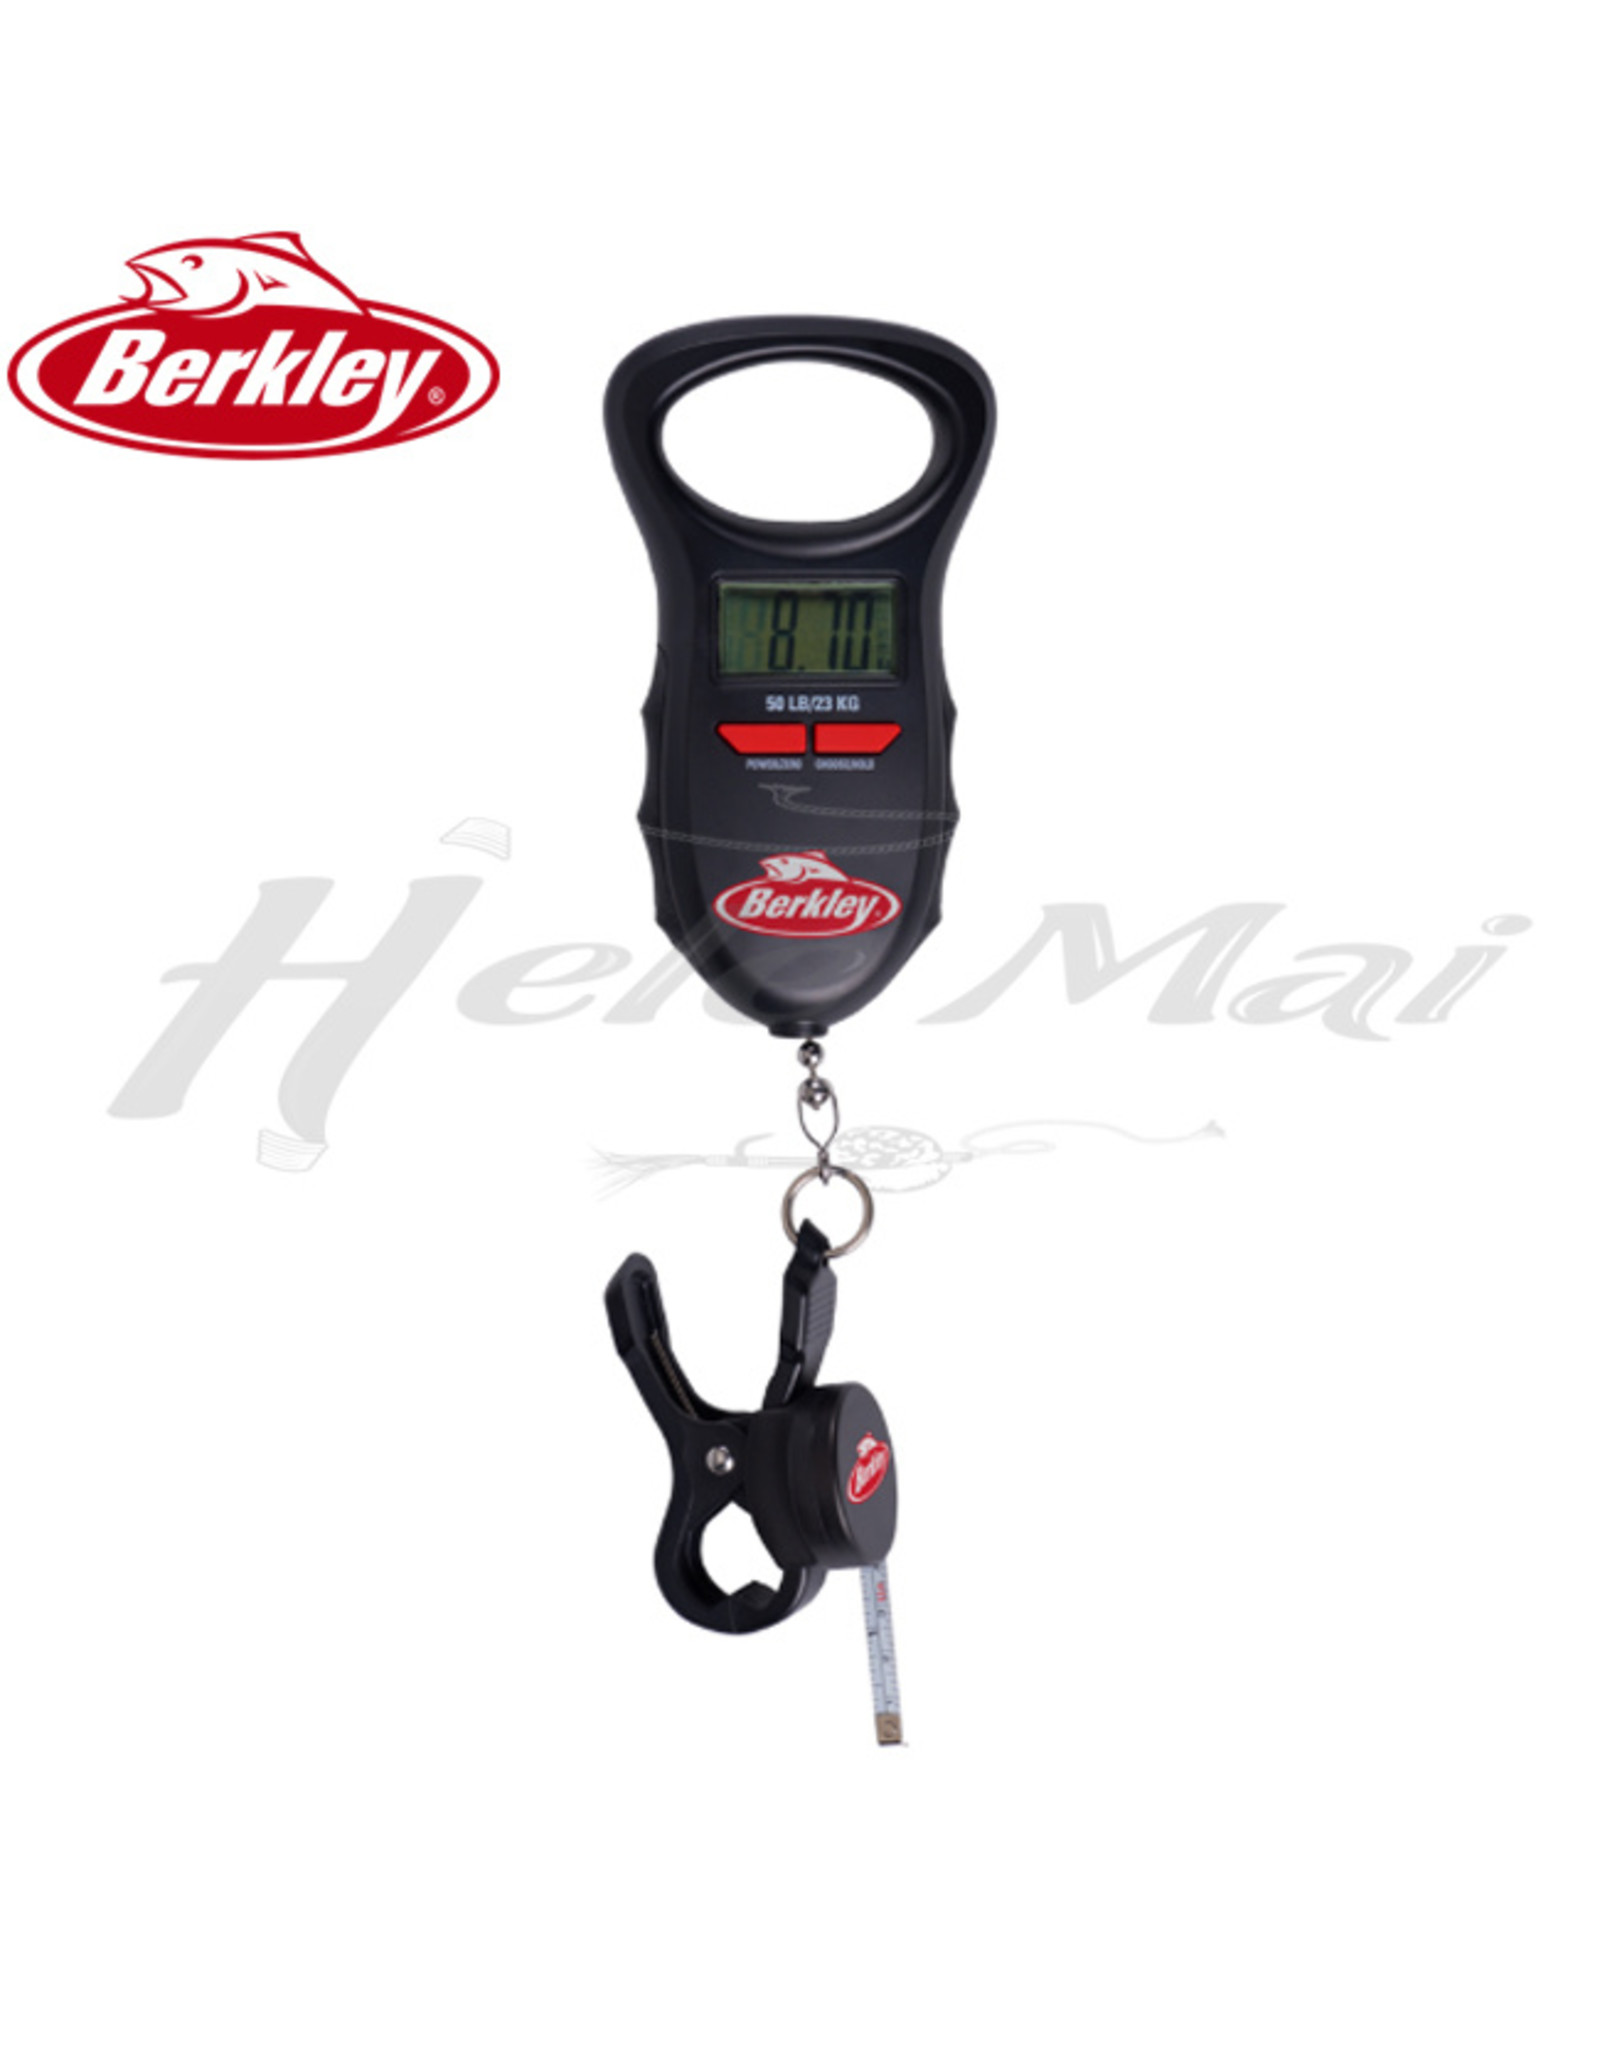 BERKLEY Portable Digital Scale with Tape, BCMDFS50T, 50#